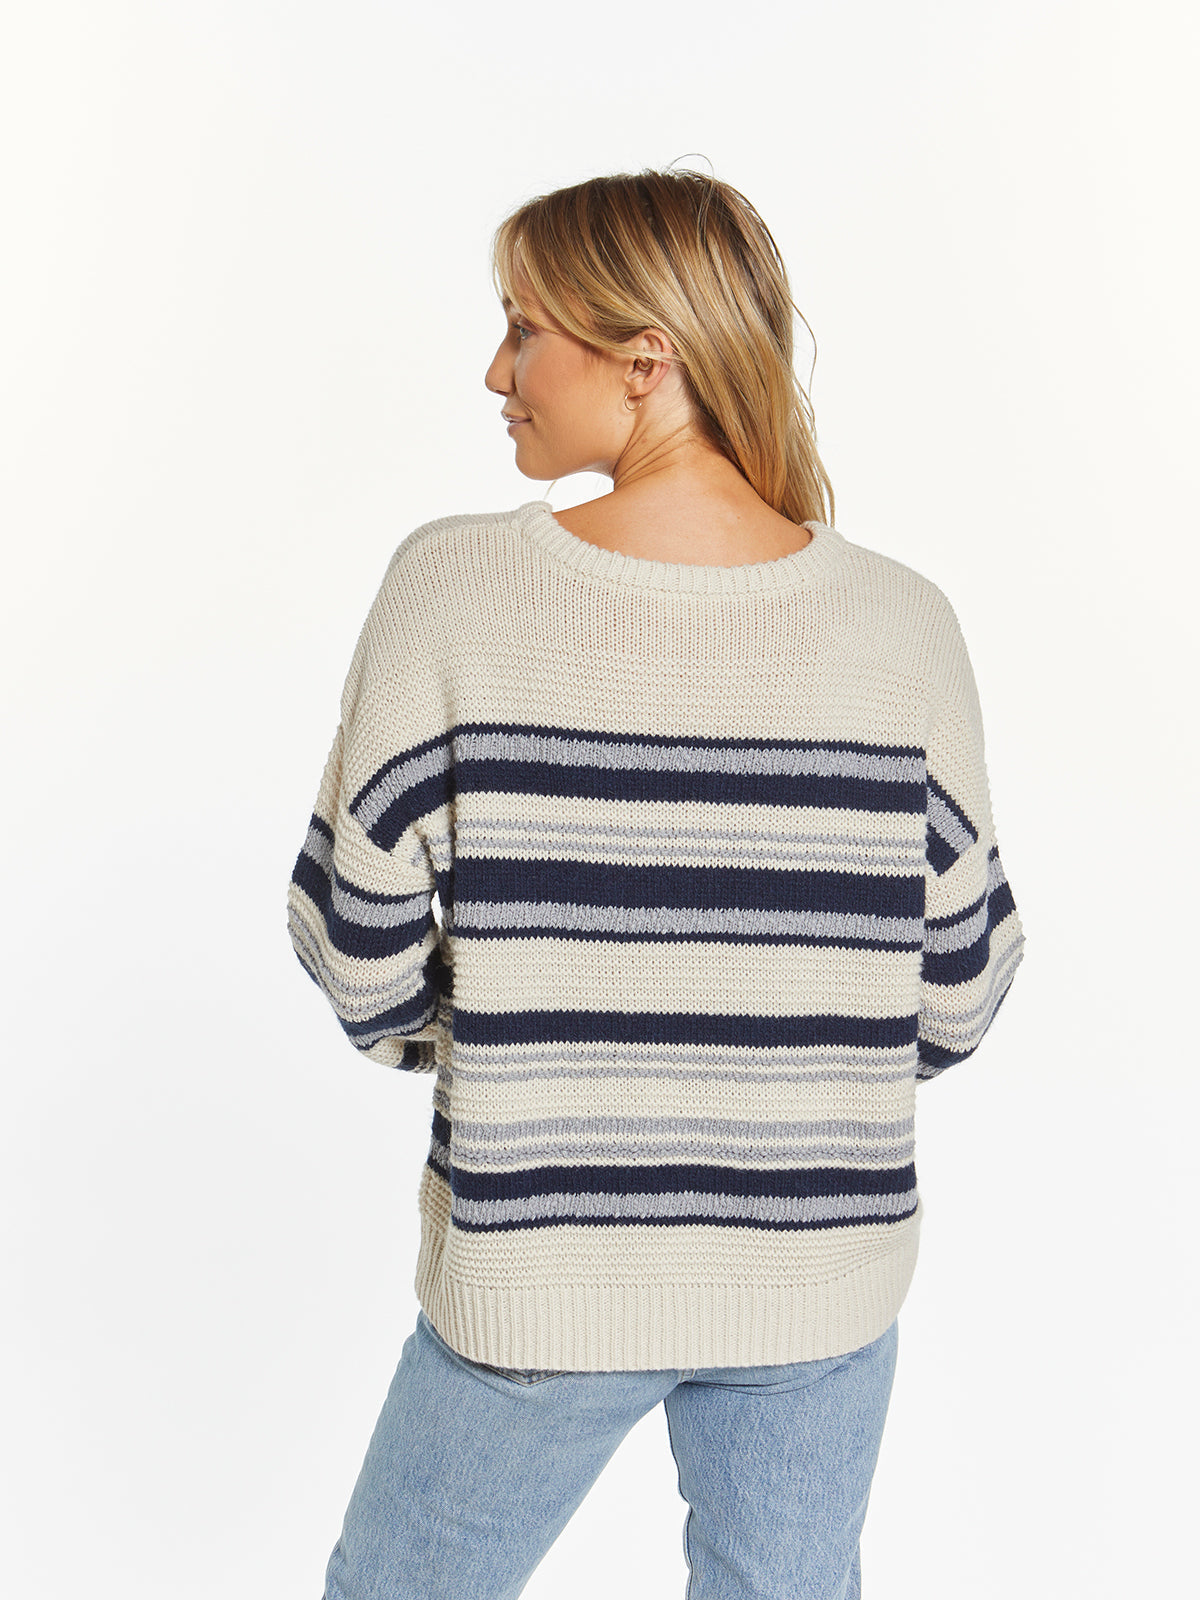 ORLA SWEATER - PRE PACK 6 UNITS